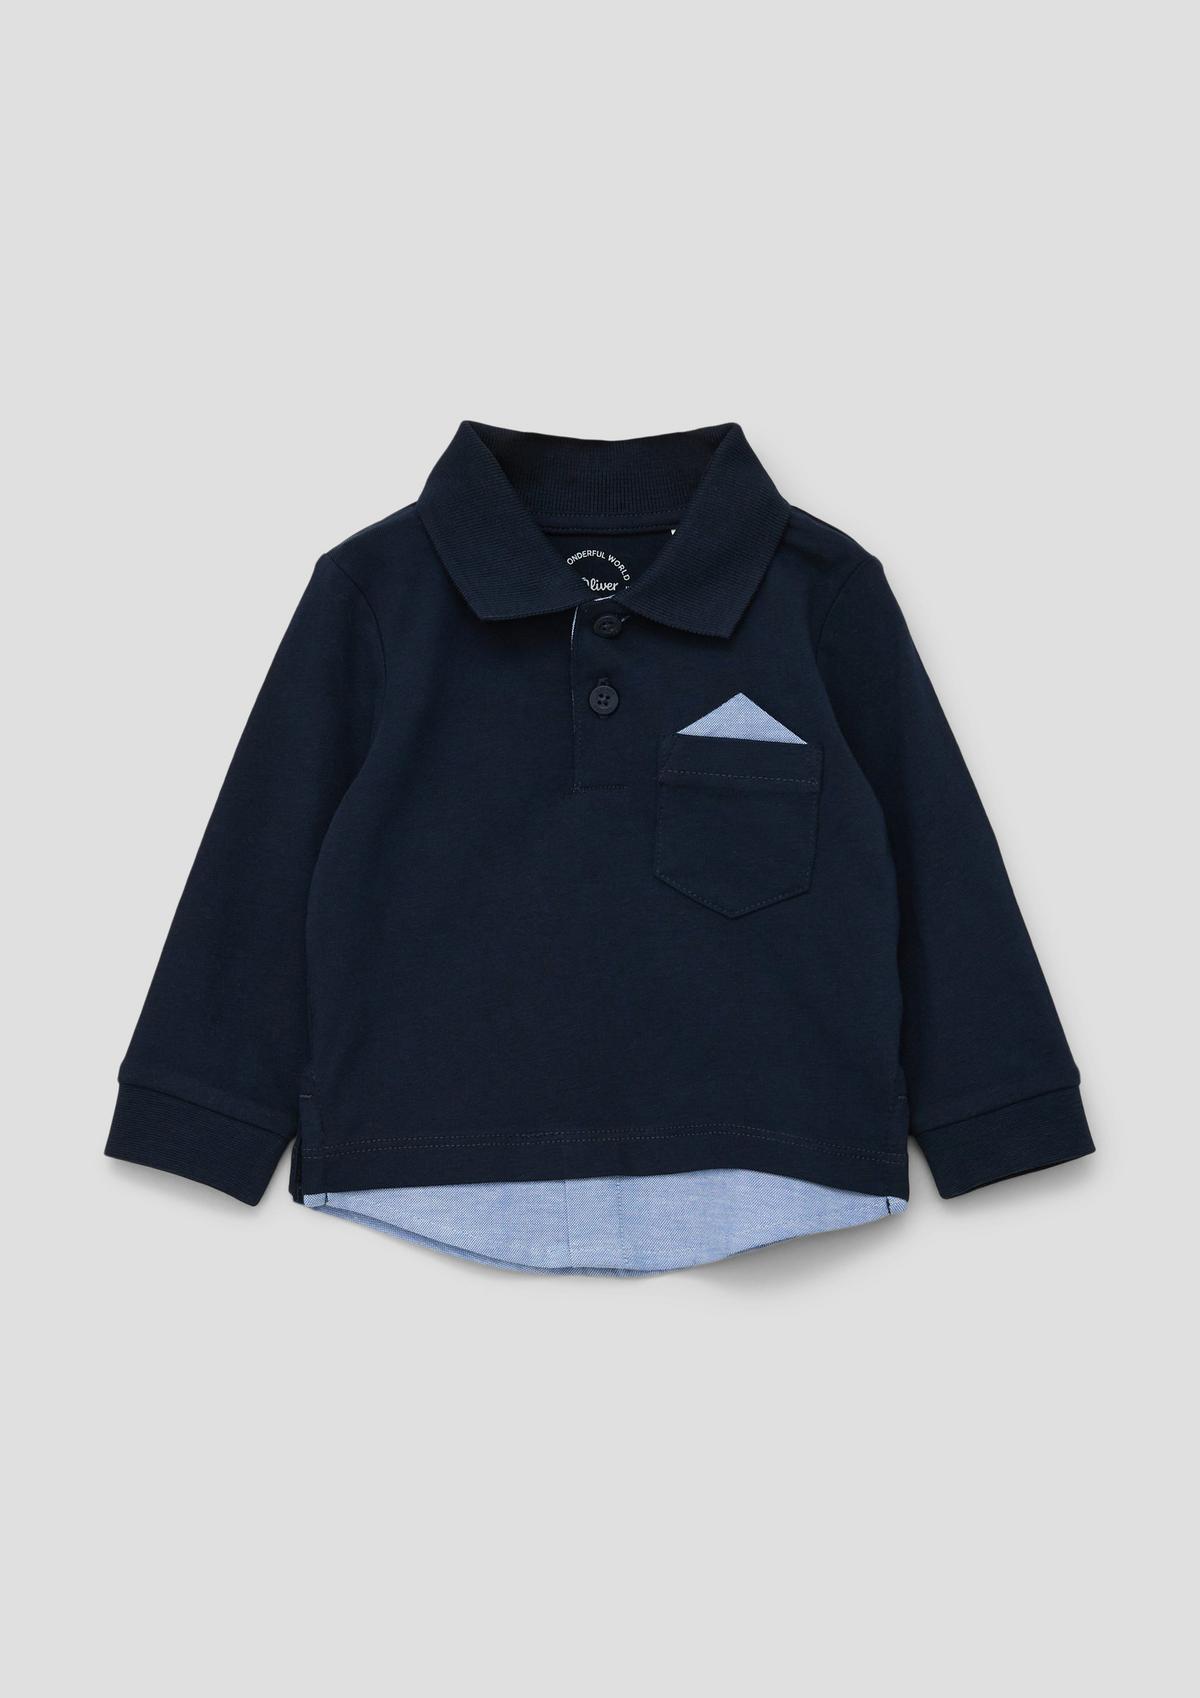 s.Oliver Polo shirt in a layered look